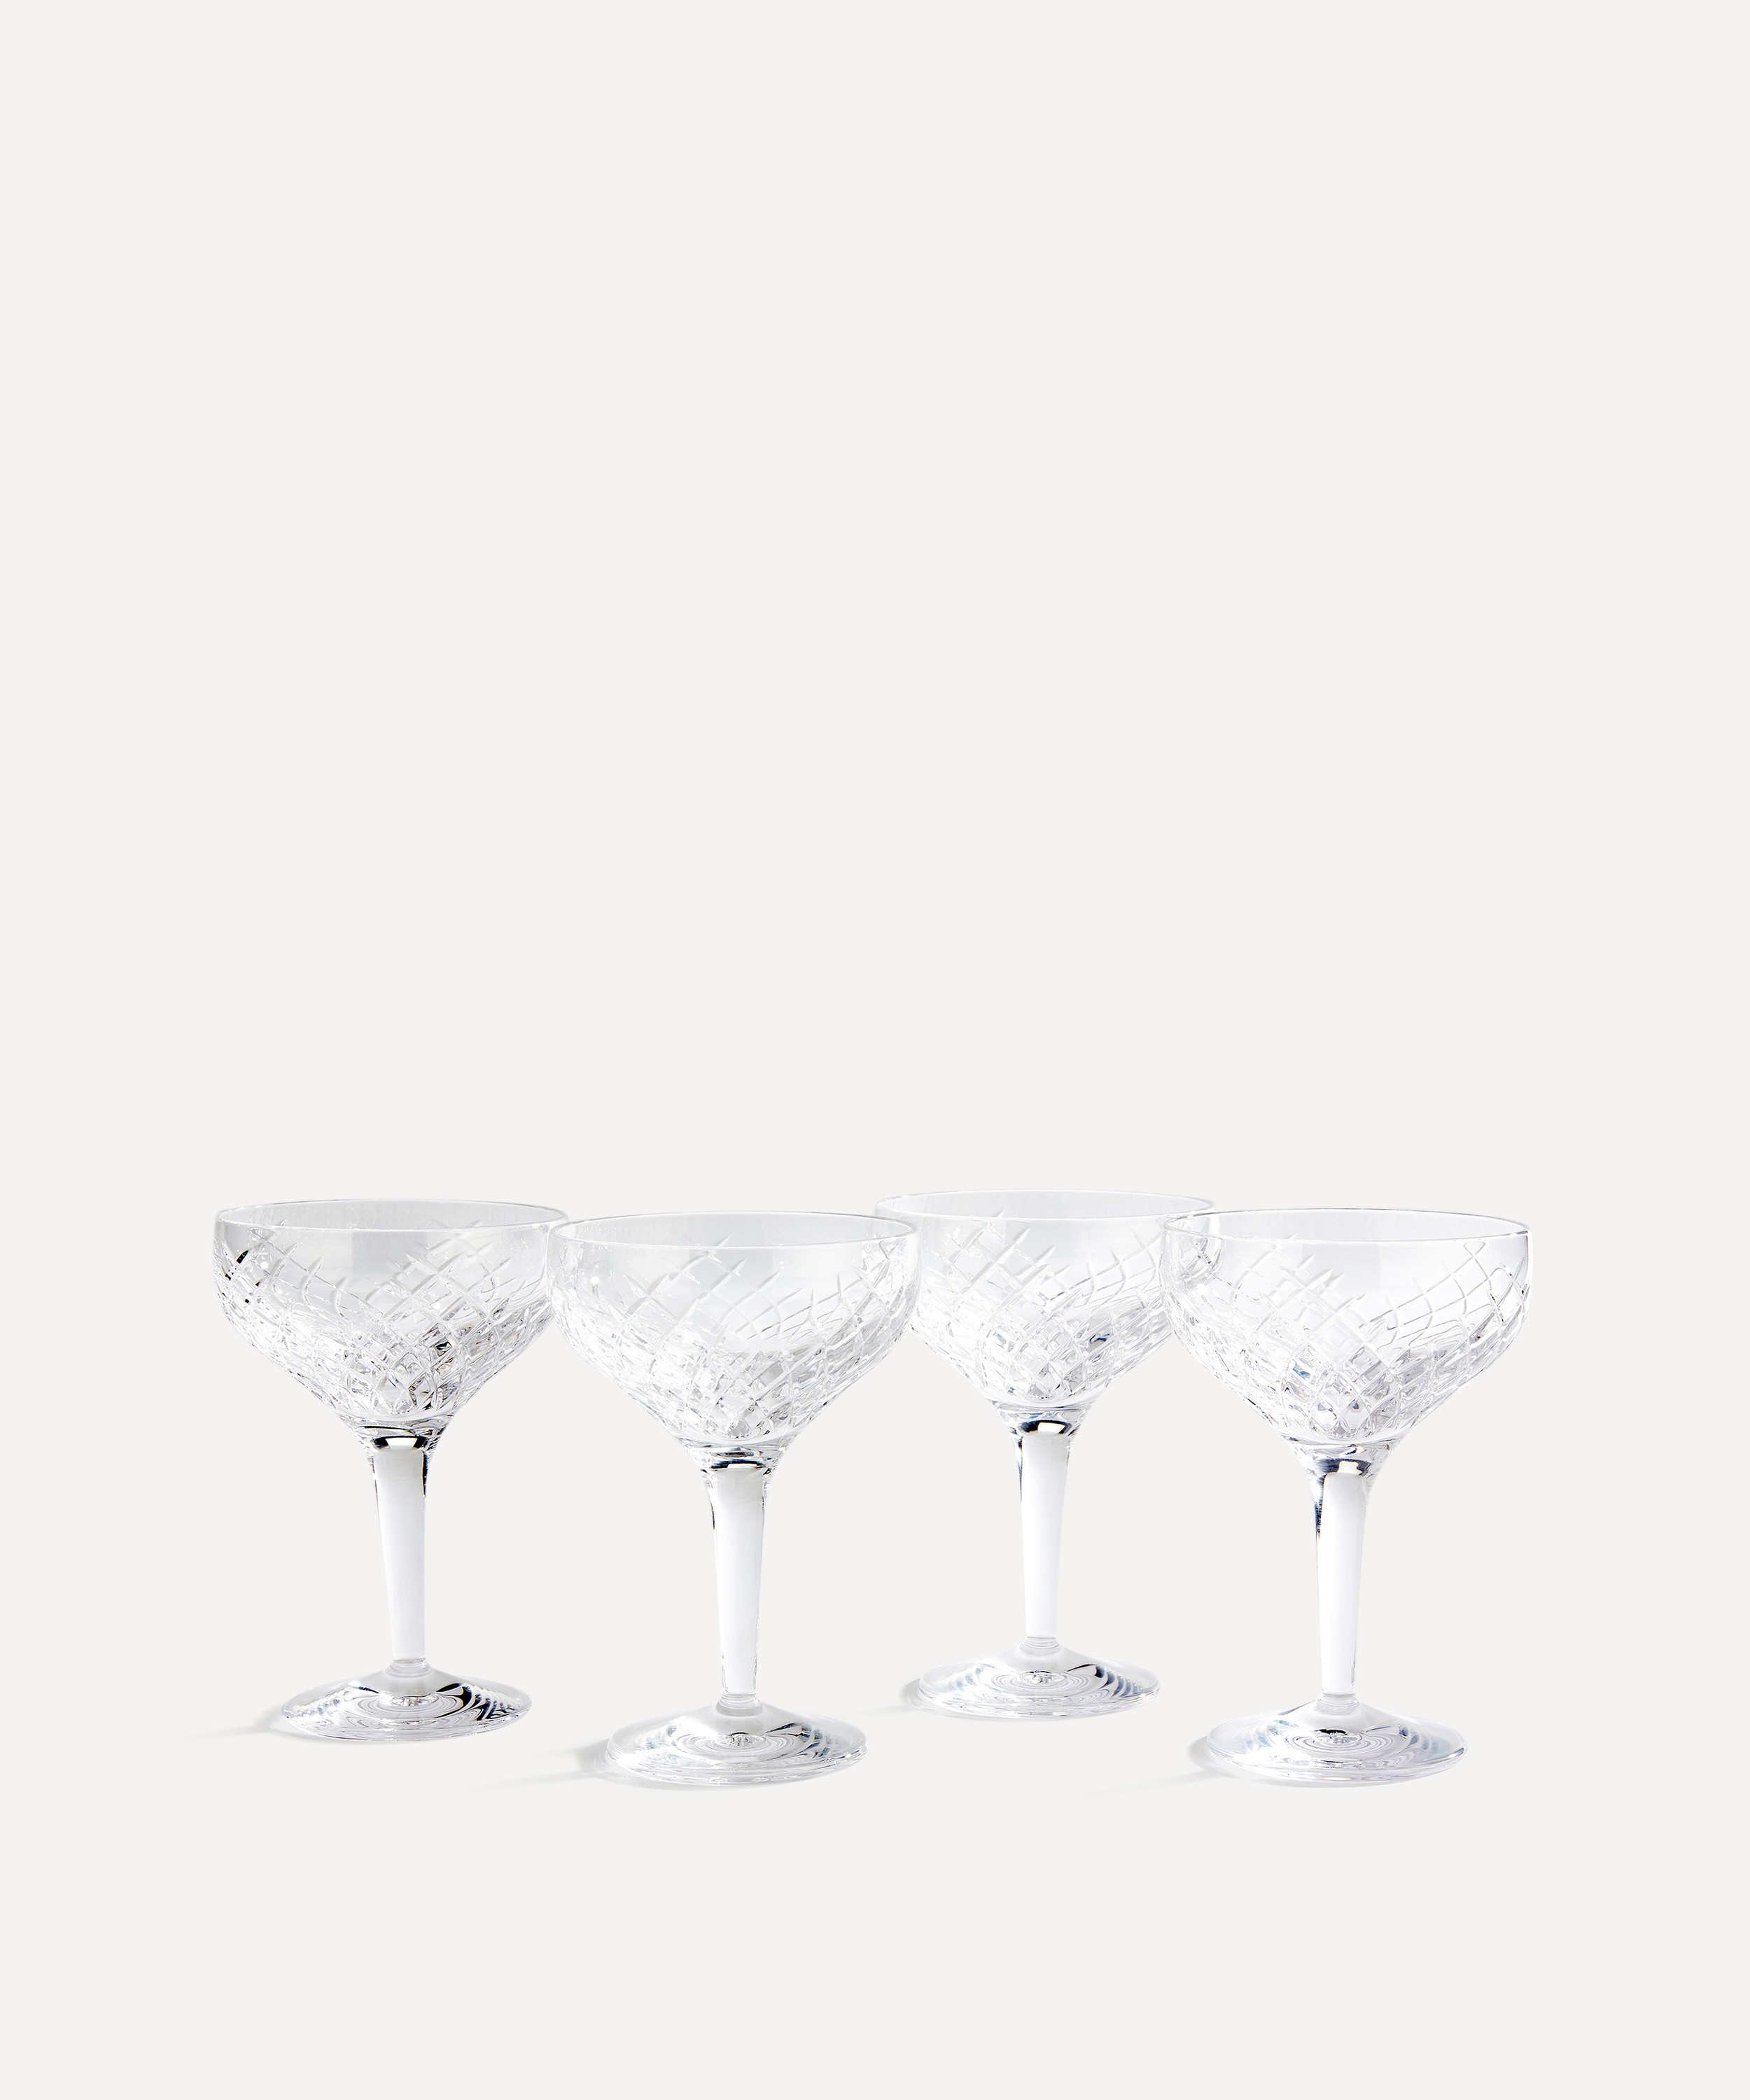 Set of 4 Cut Crystal-Style Coupe Champagne Tower Glasses | New Years Eve  Holiday Celebration or Romantic Wedding Decor Table scape Drinkware